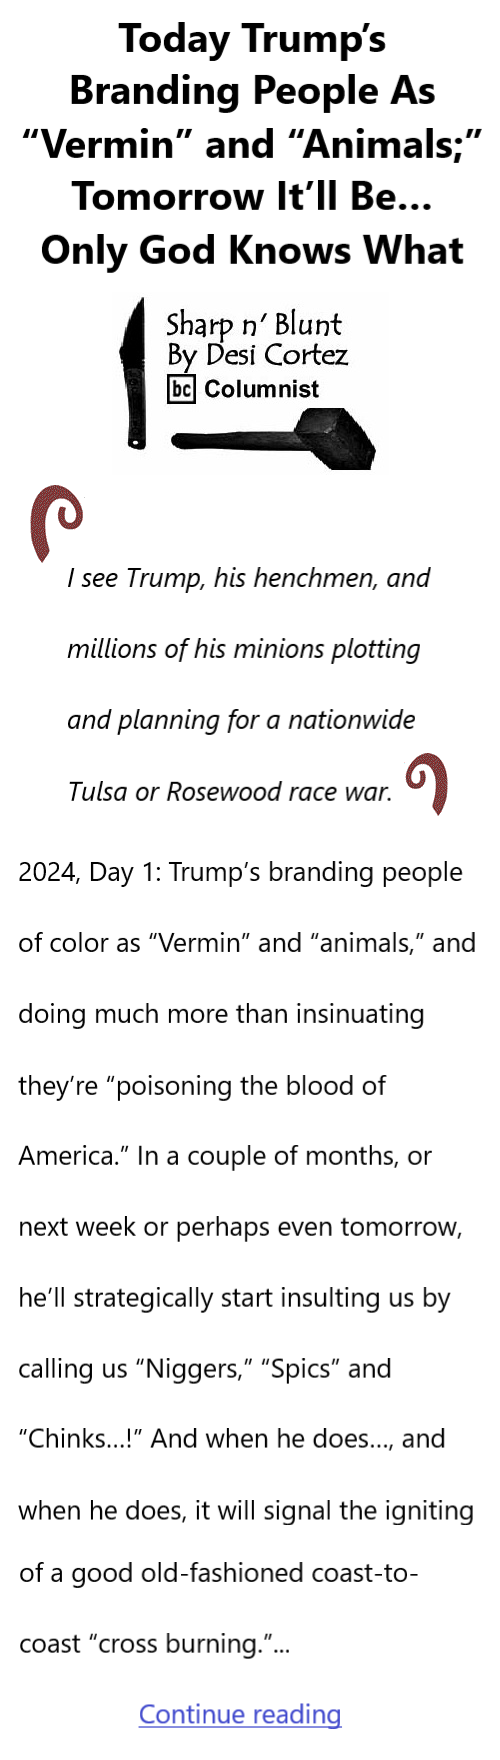 BlackCommentator.com Jan 4, 2024 - Issue 982: Today Trump’s Branding People As “Vermin” and “Animals;” Tomorrow It’ll Be…Only God Knows What - Sharp n' Blunt By Desi Cortez, BC Columnist